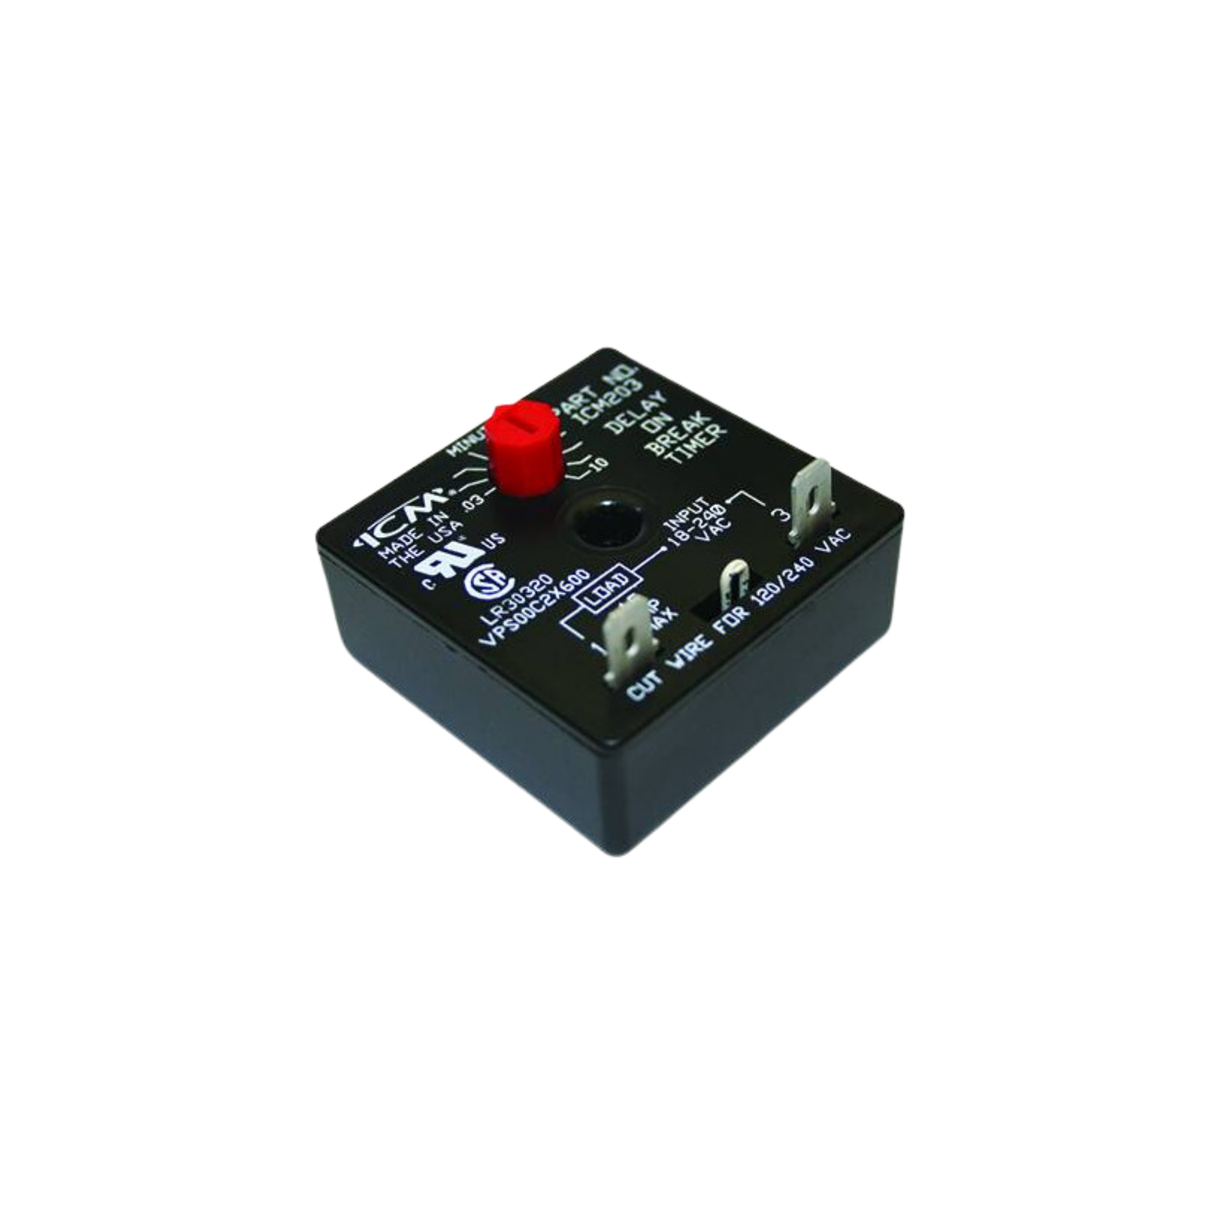 ICM Controls ICM203F 18-240 VAC, 1.5A, Delay on Break Timer with Adjustable Time Delay Relay and 6" Lead Wires